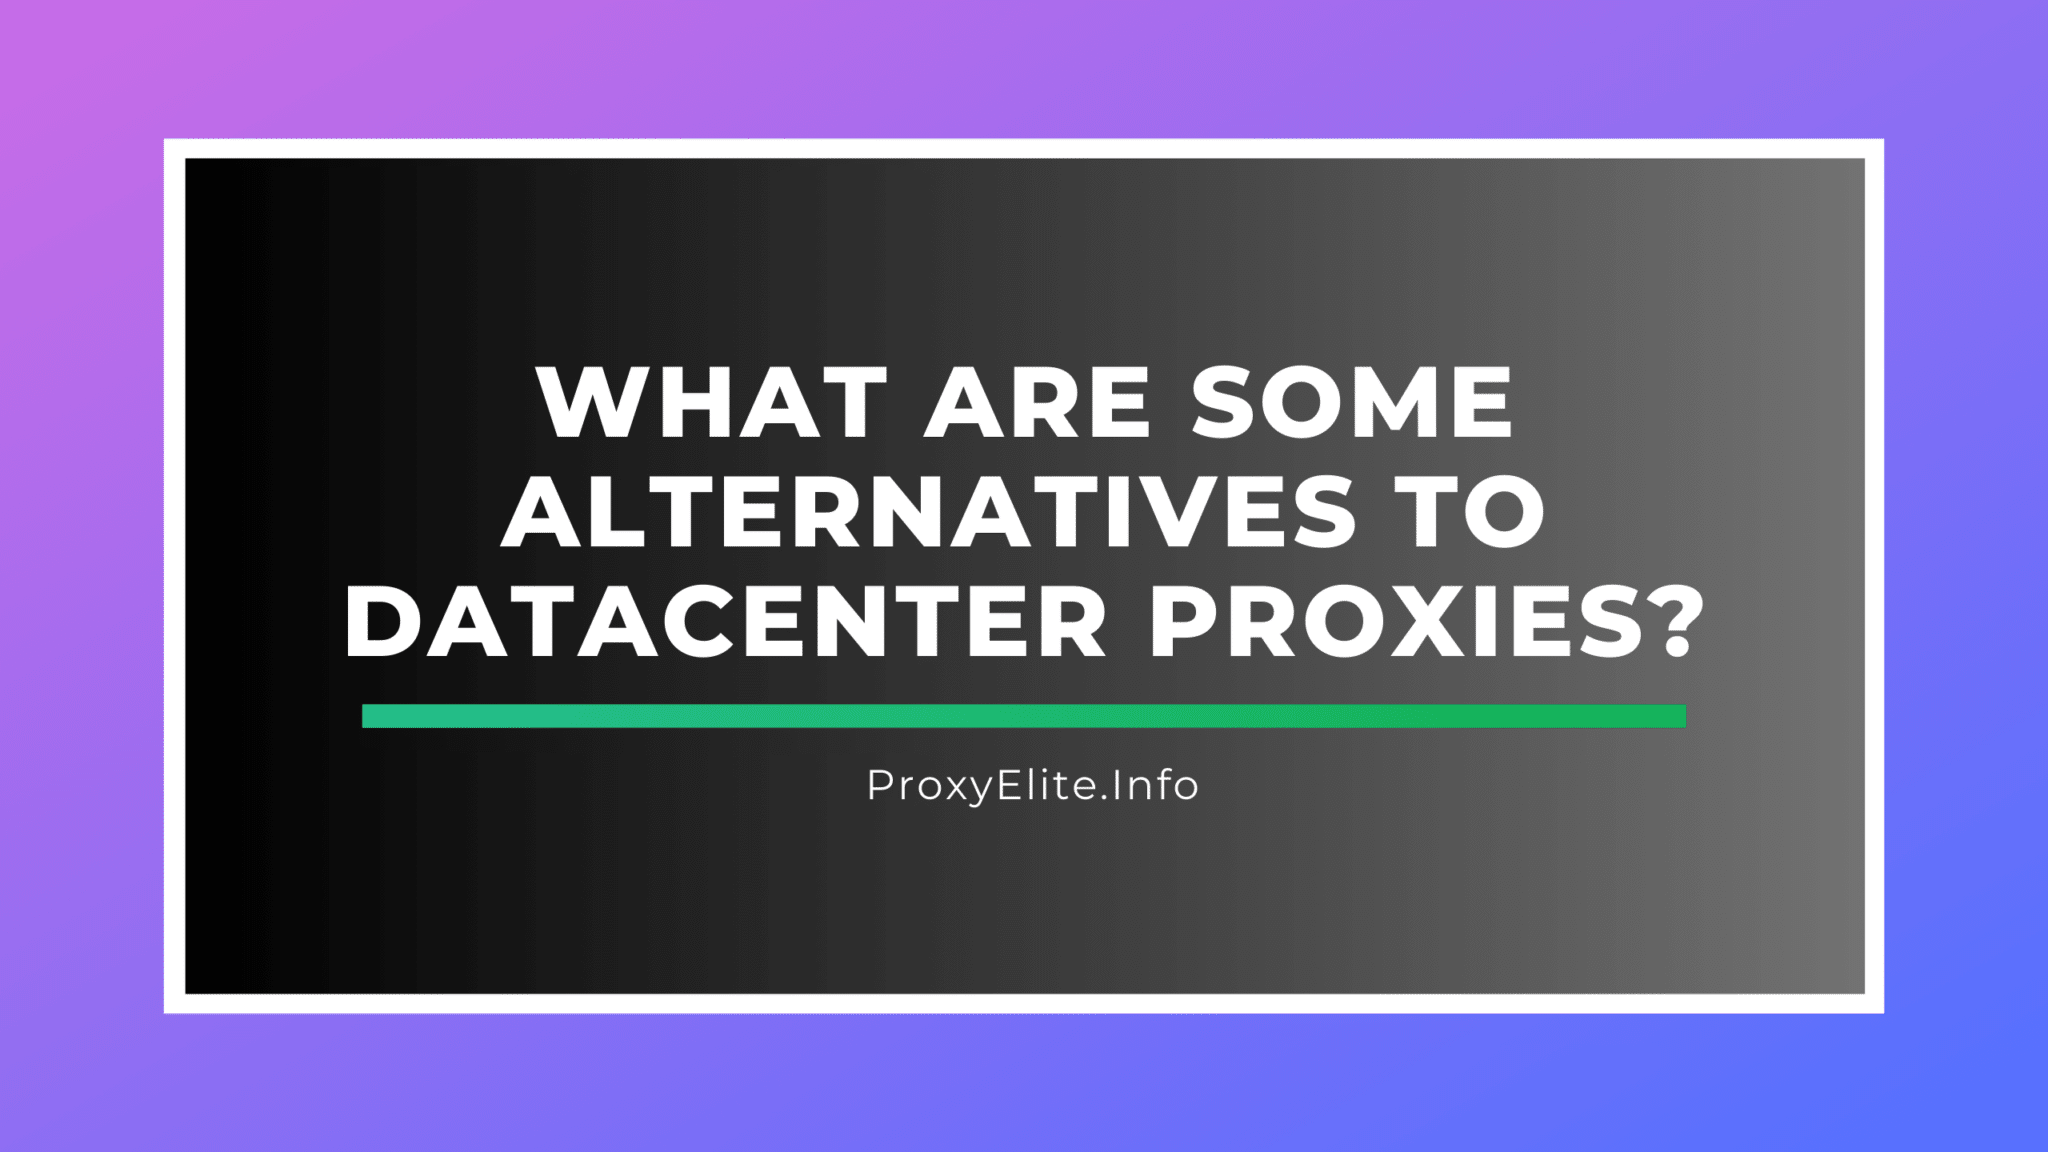 What are some alternatives to datacenter proxies?